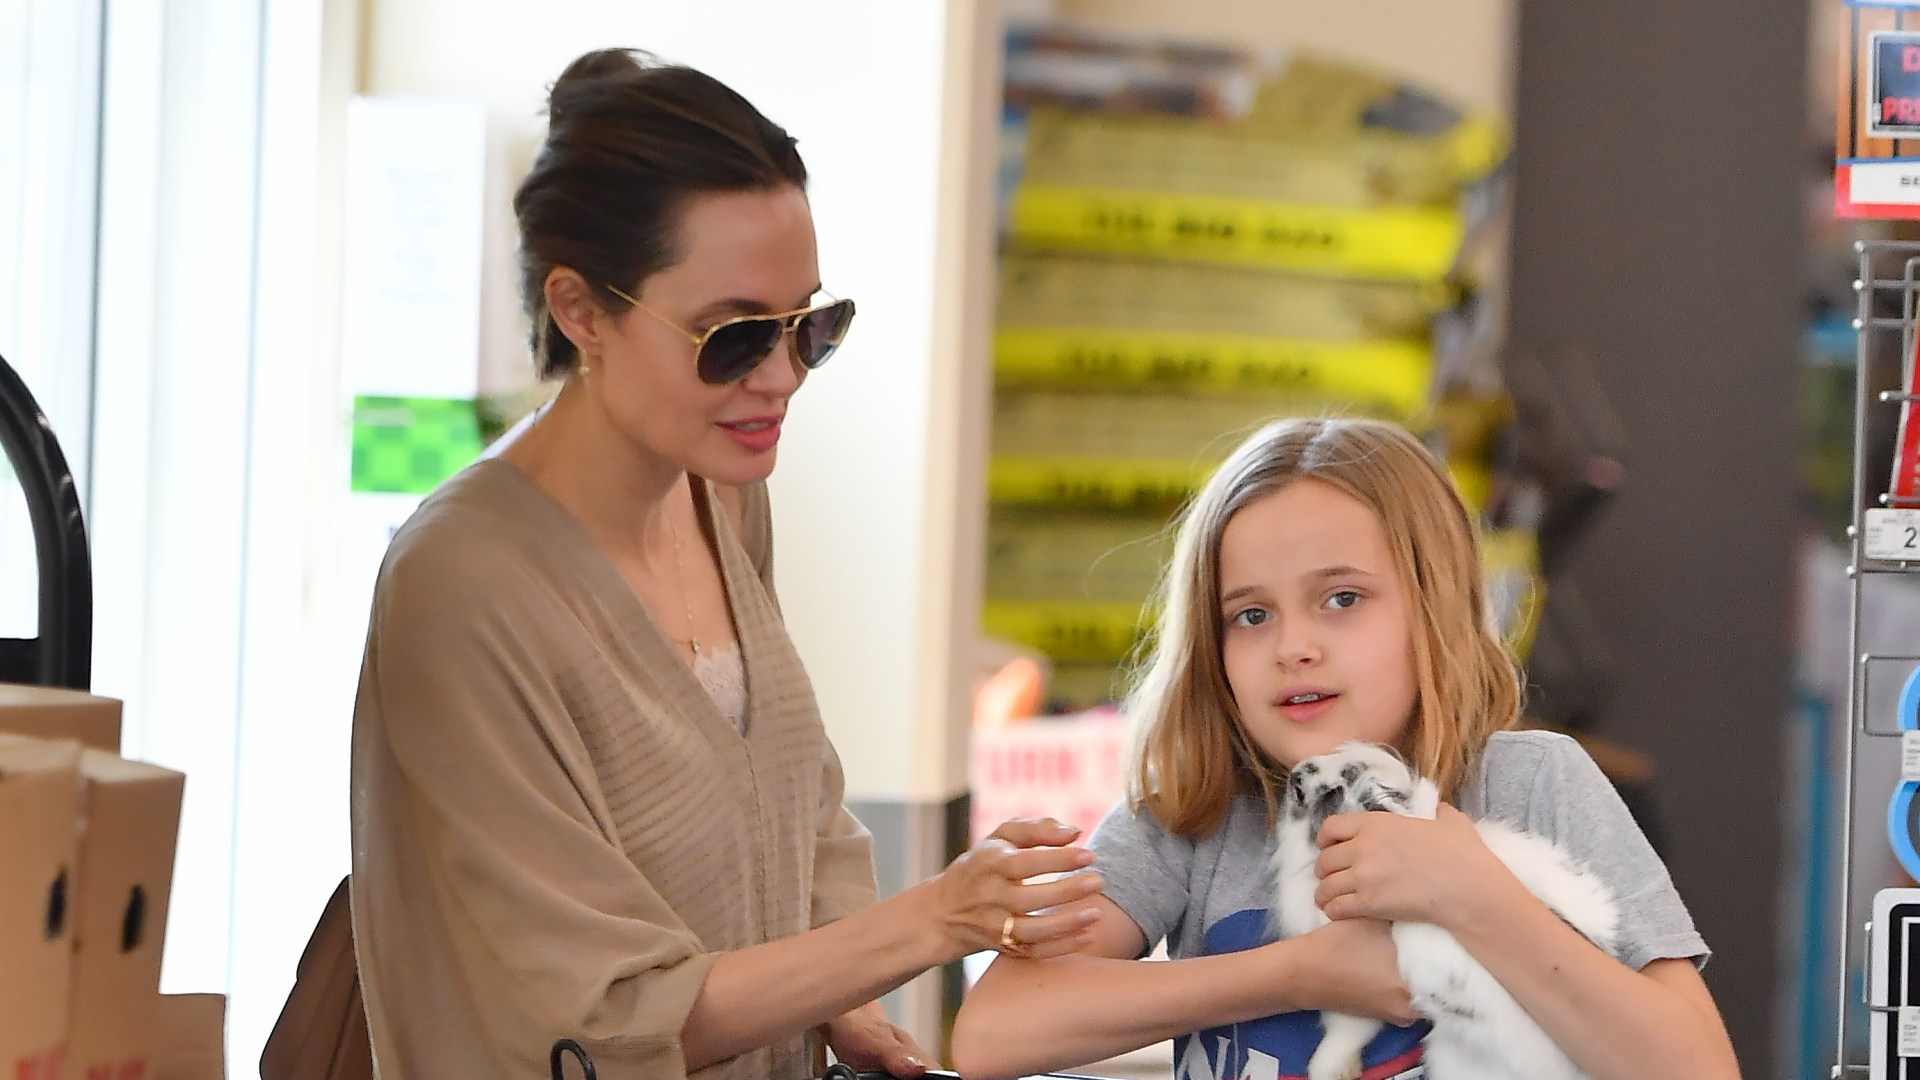 Angelina Jolie's Daughter Shiloh Looks All Grown Up Photos